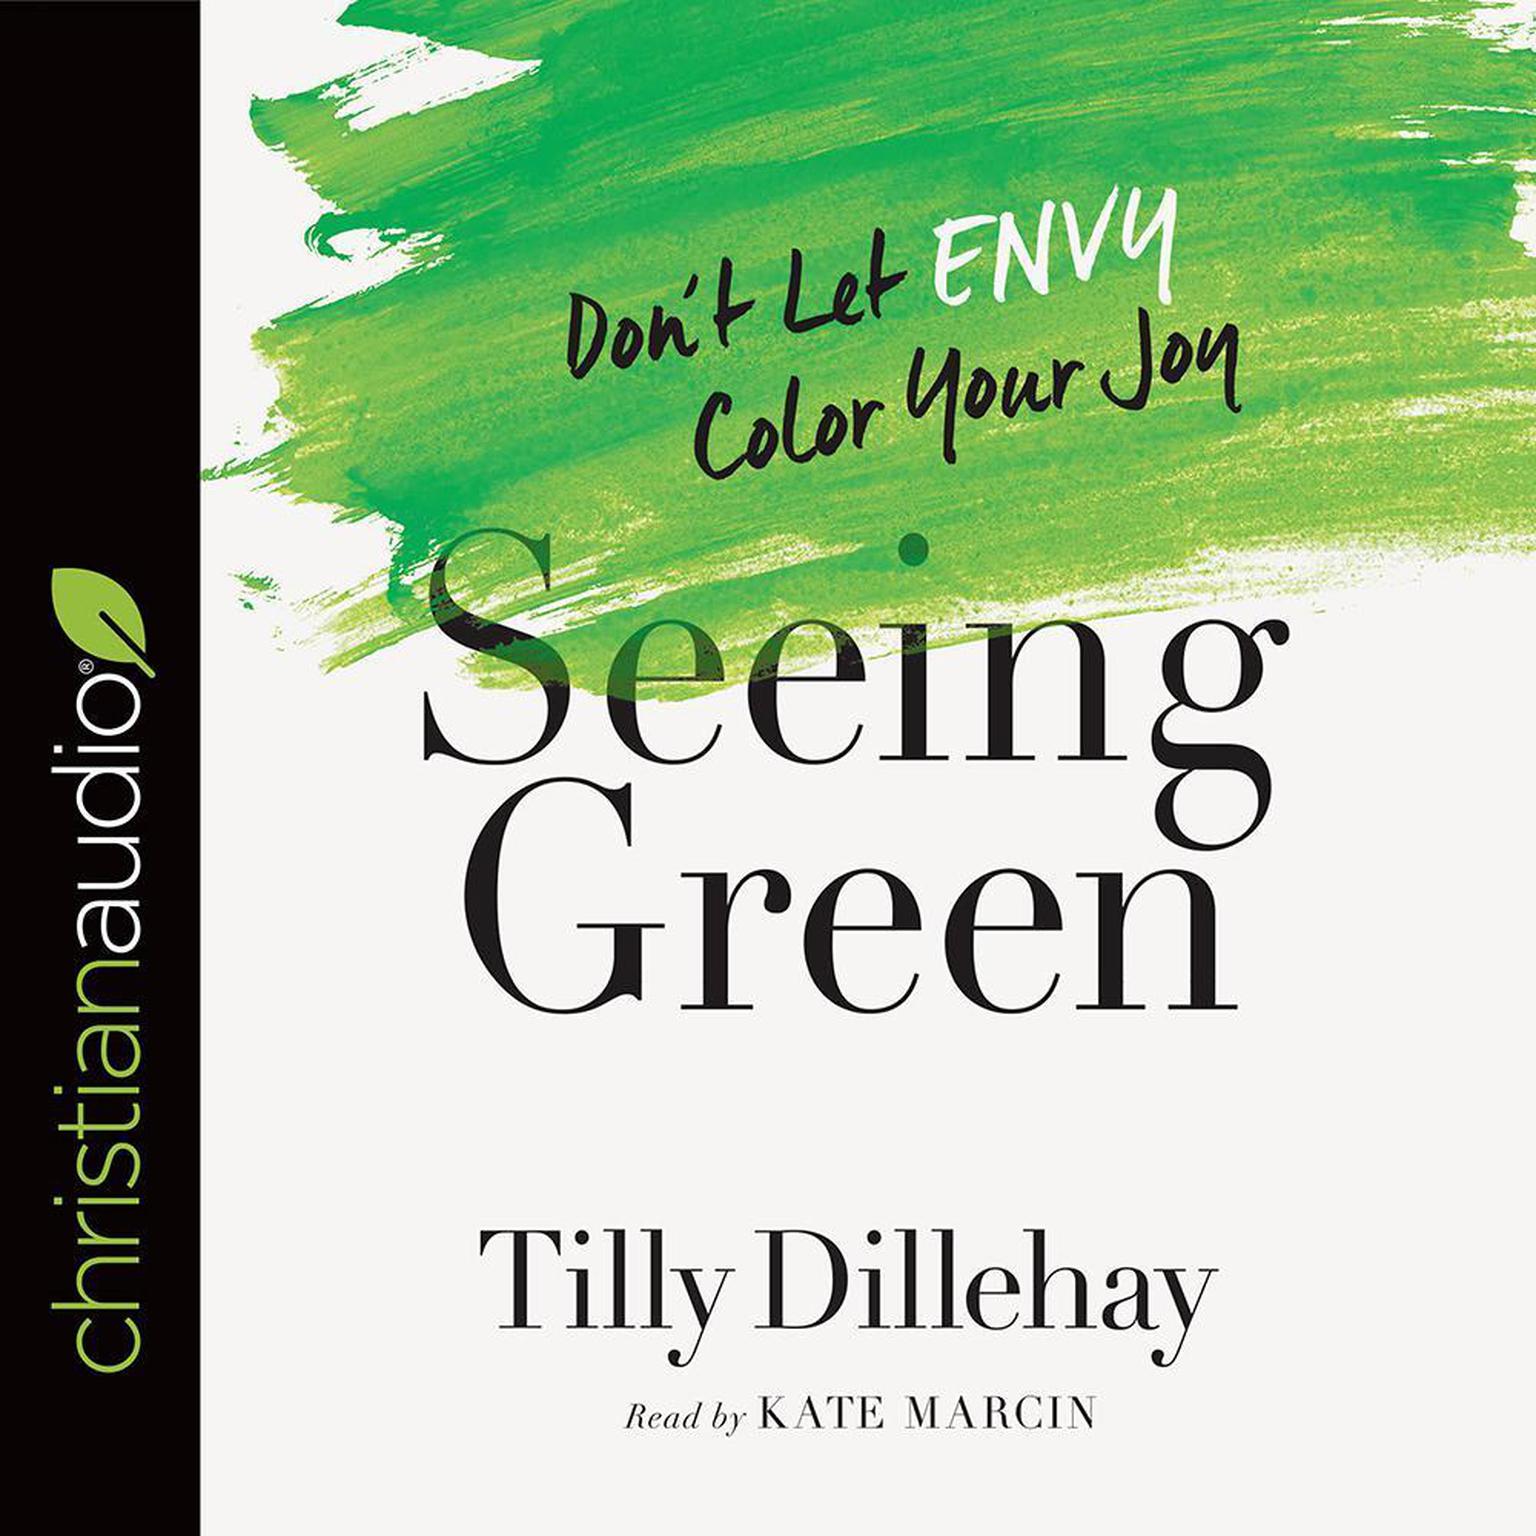 Seeing Green: Dont Let Envy Color Your Joy Audiobook, by Tilly Dillehay